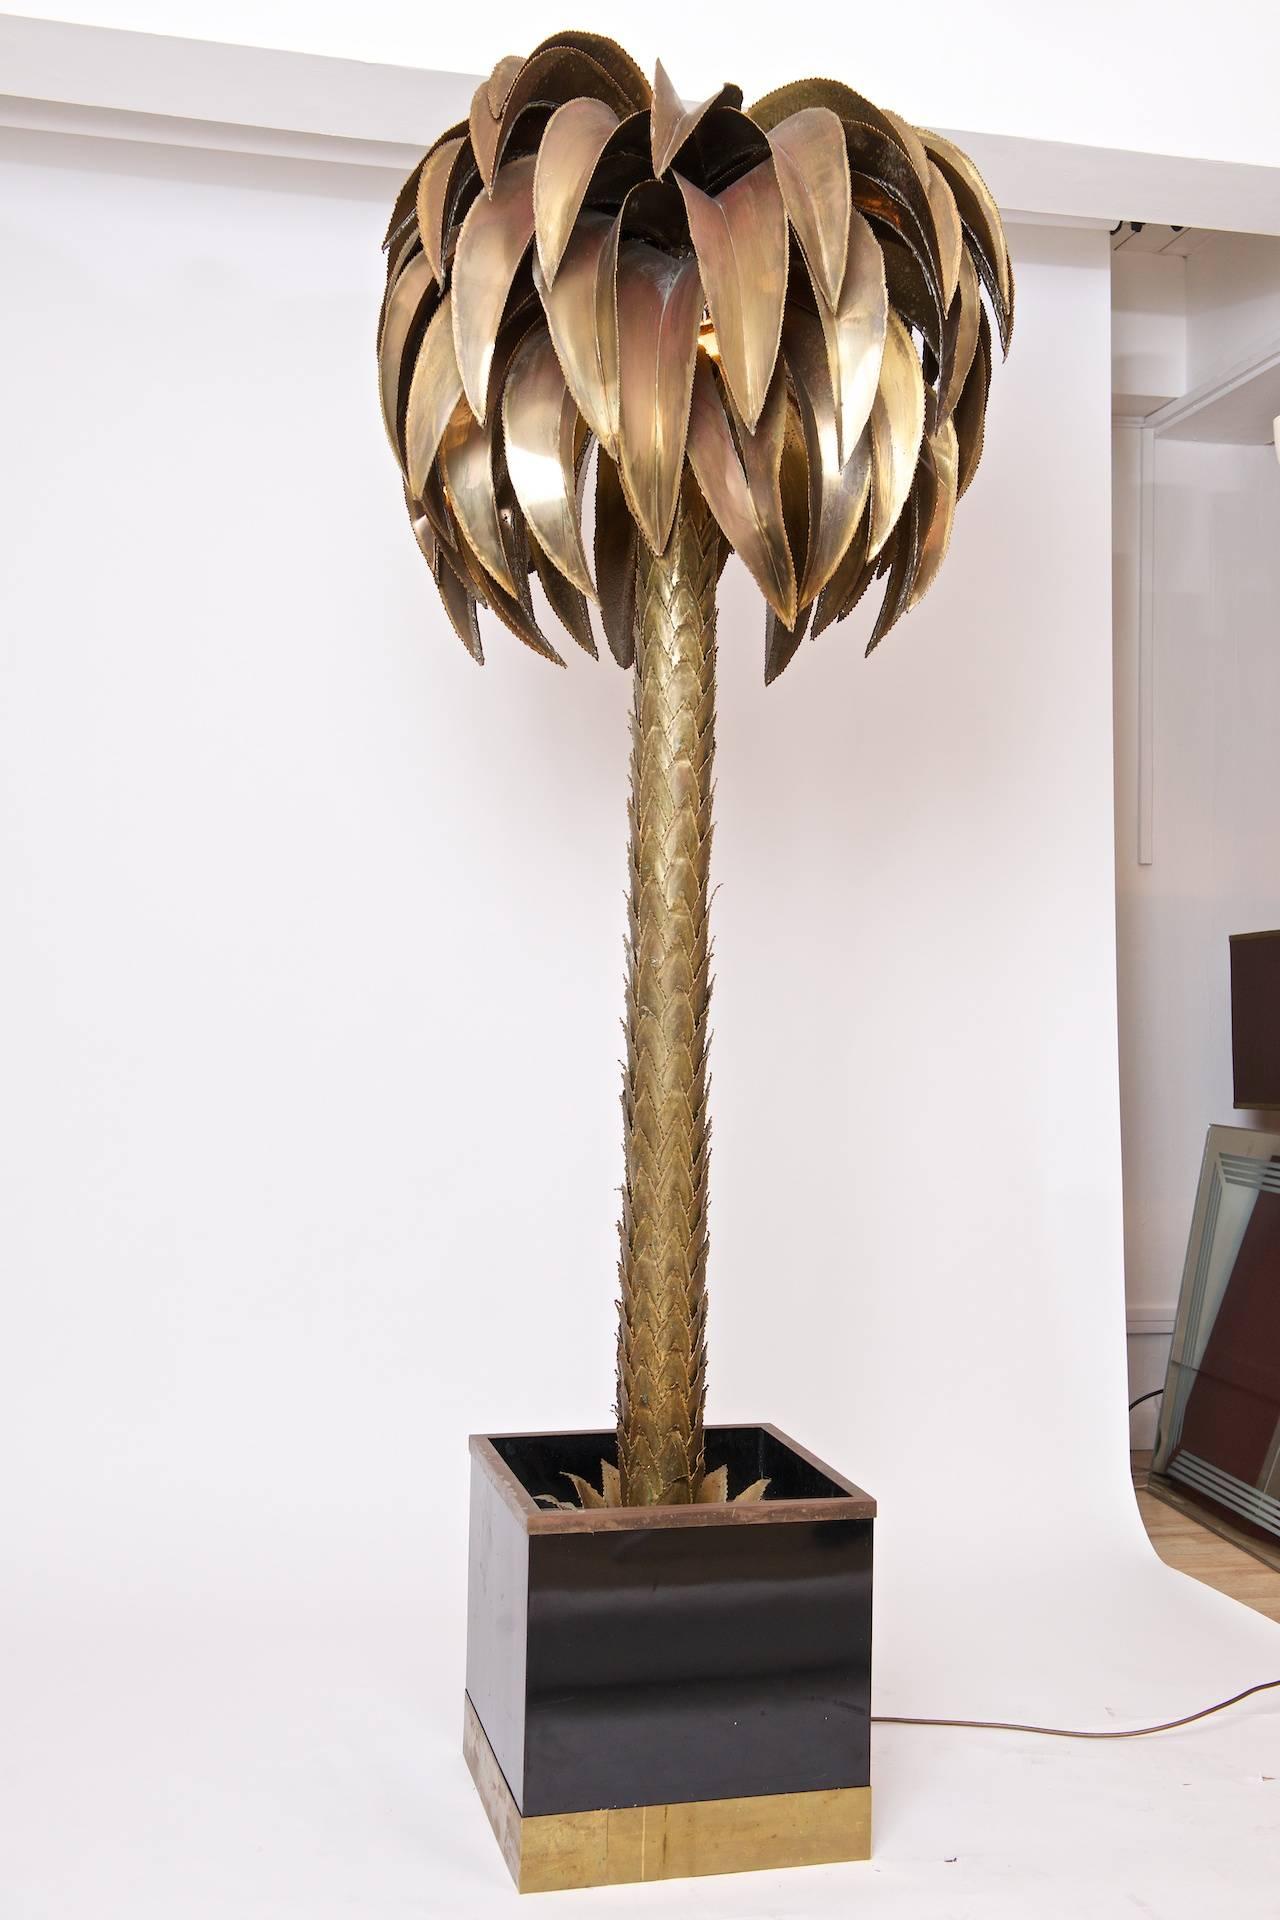 Large floor light in form of palm tree

 Often attributed to Maison Jansen. Measures: 2.03 meters.

